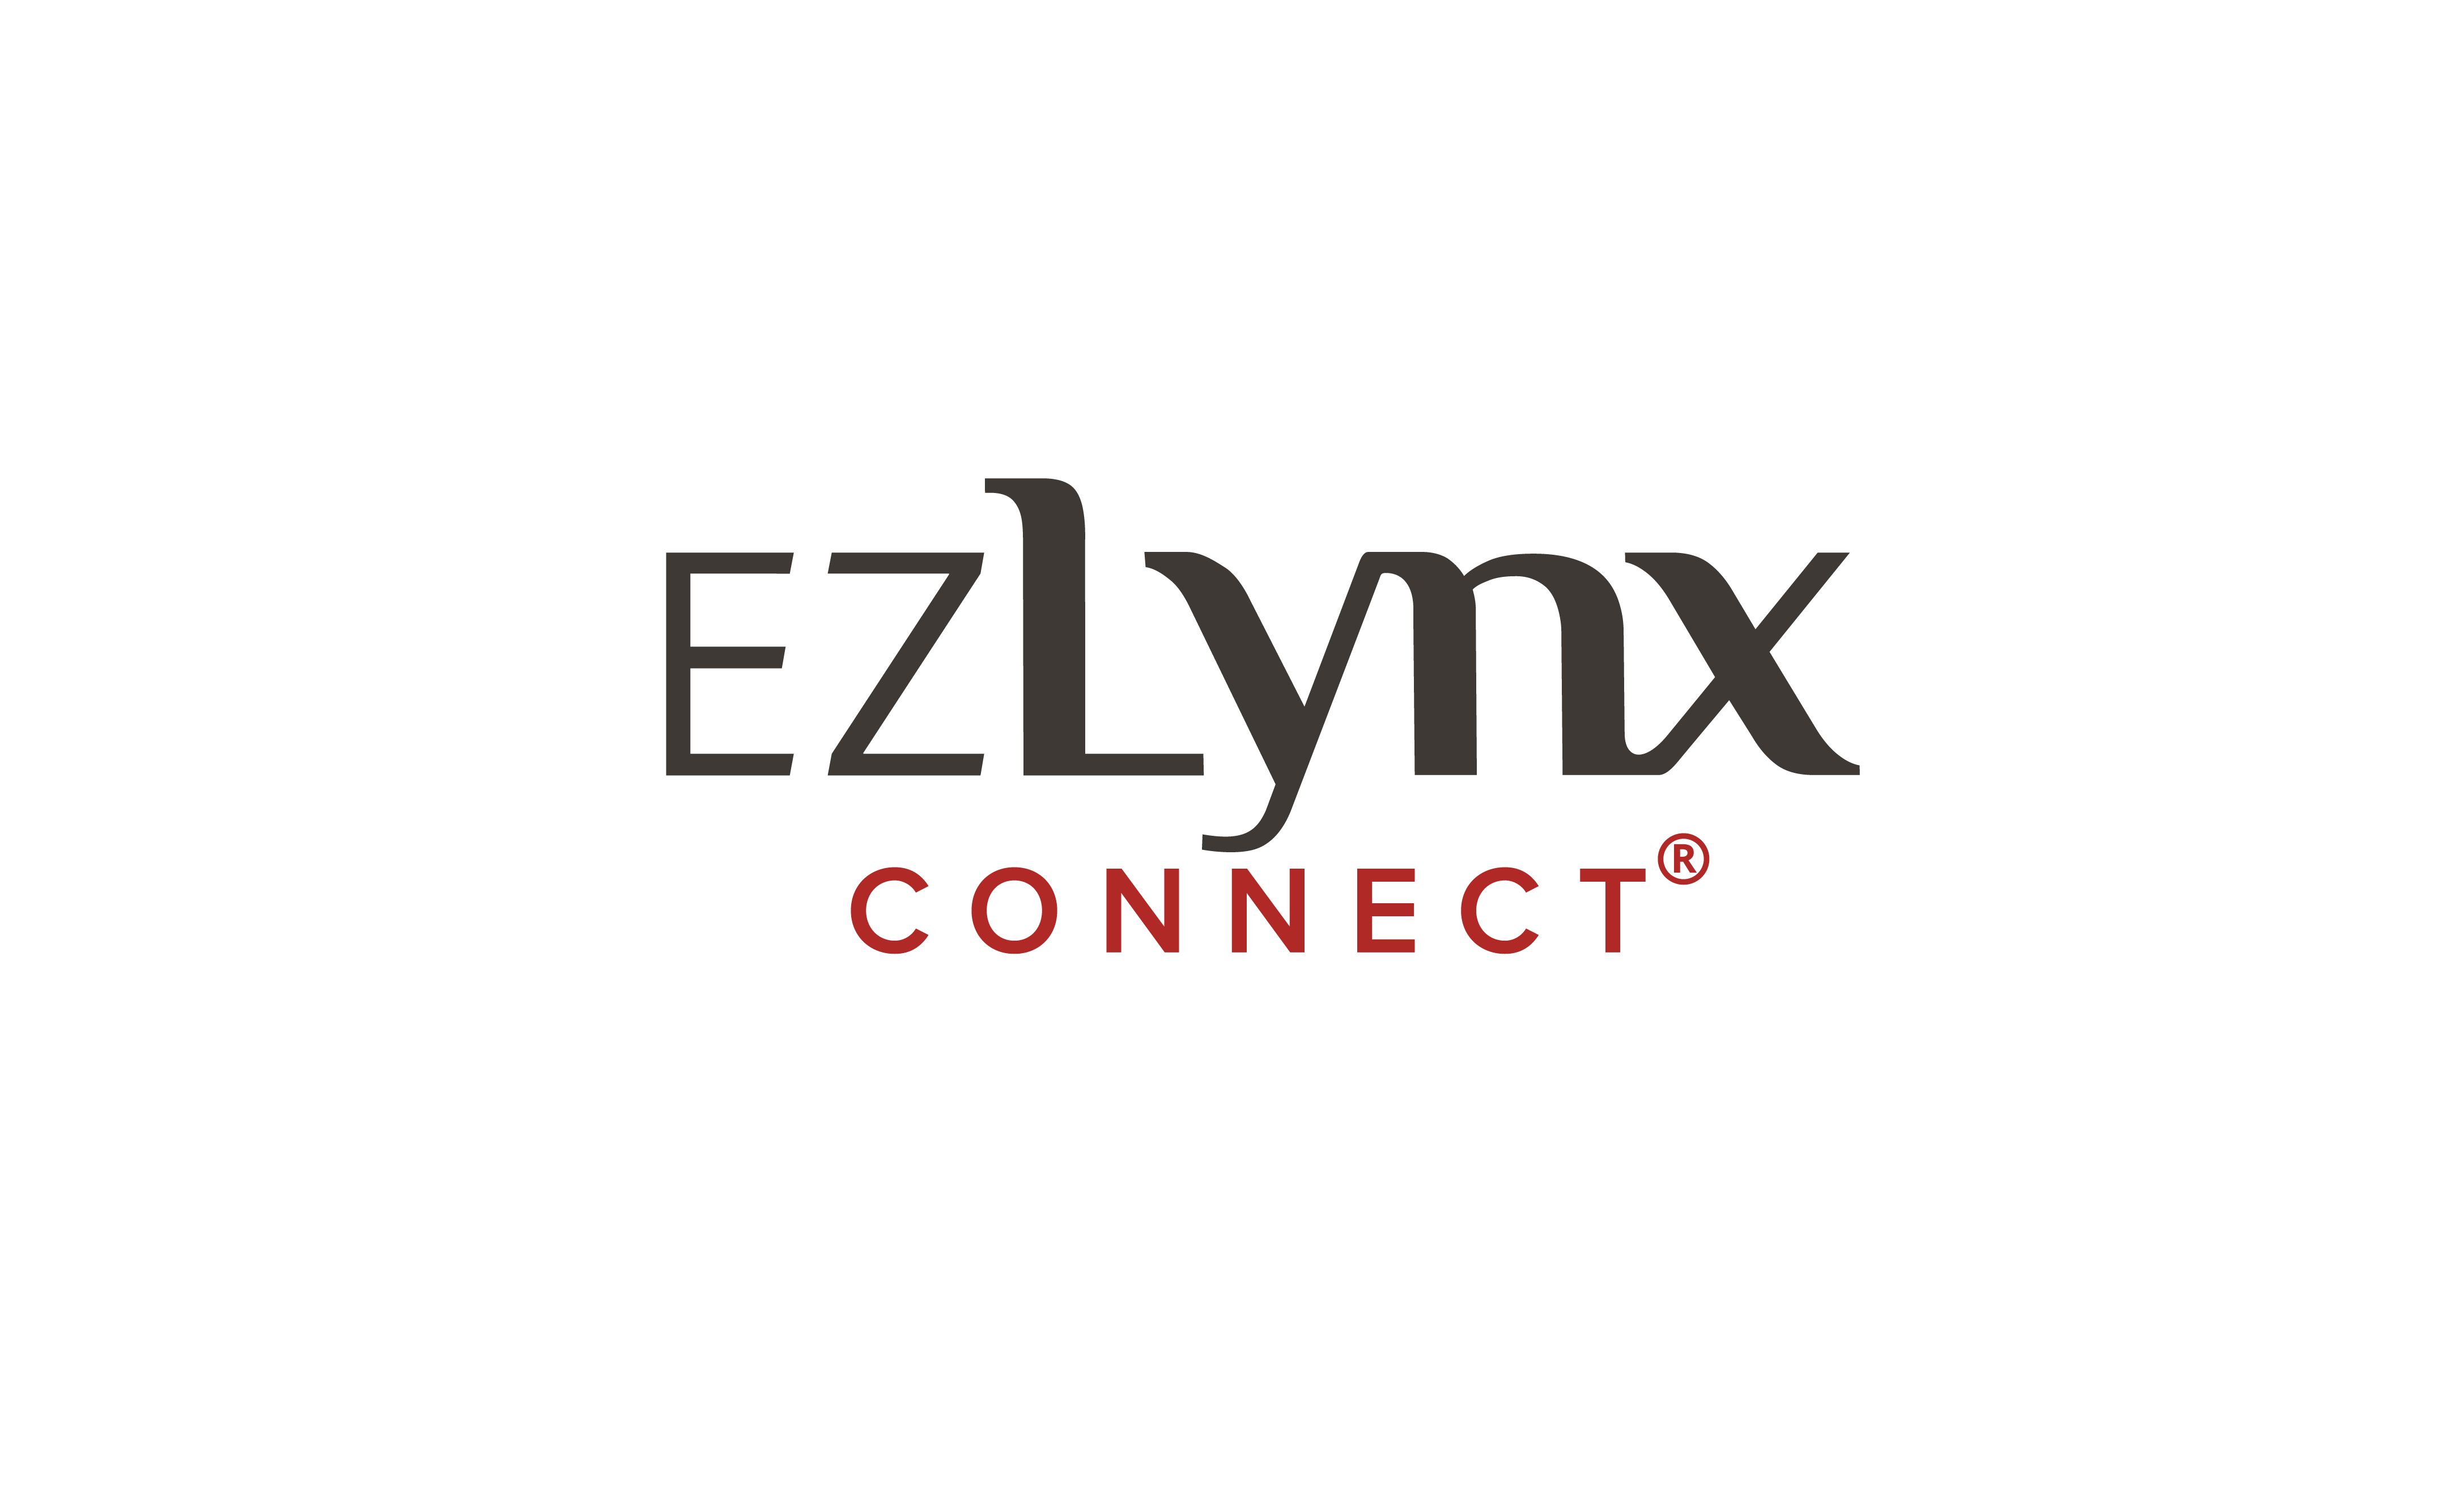 EZLynx Connect provides third-party businesses an avenue to distribute their products and services directly within the EZLynx platform.